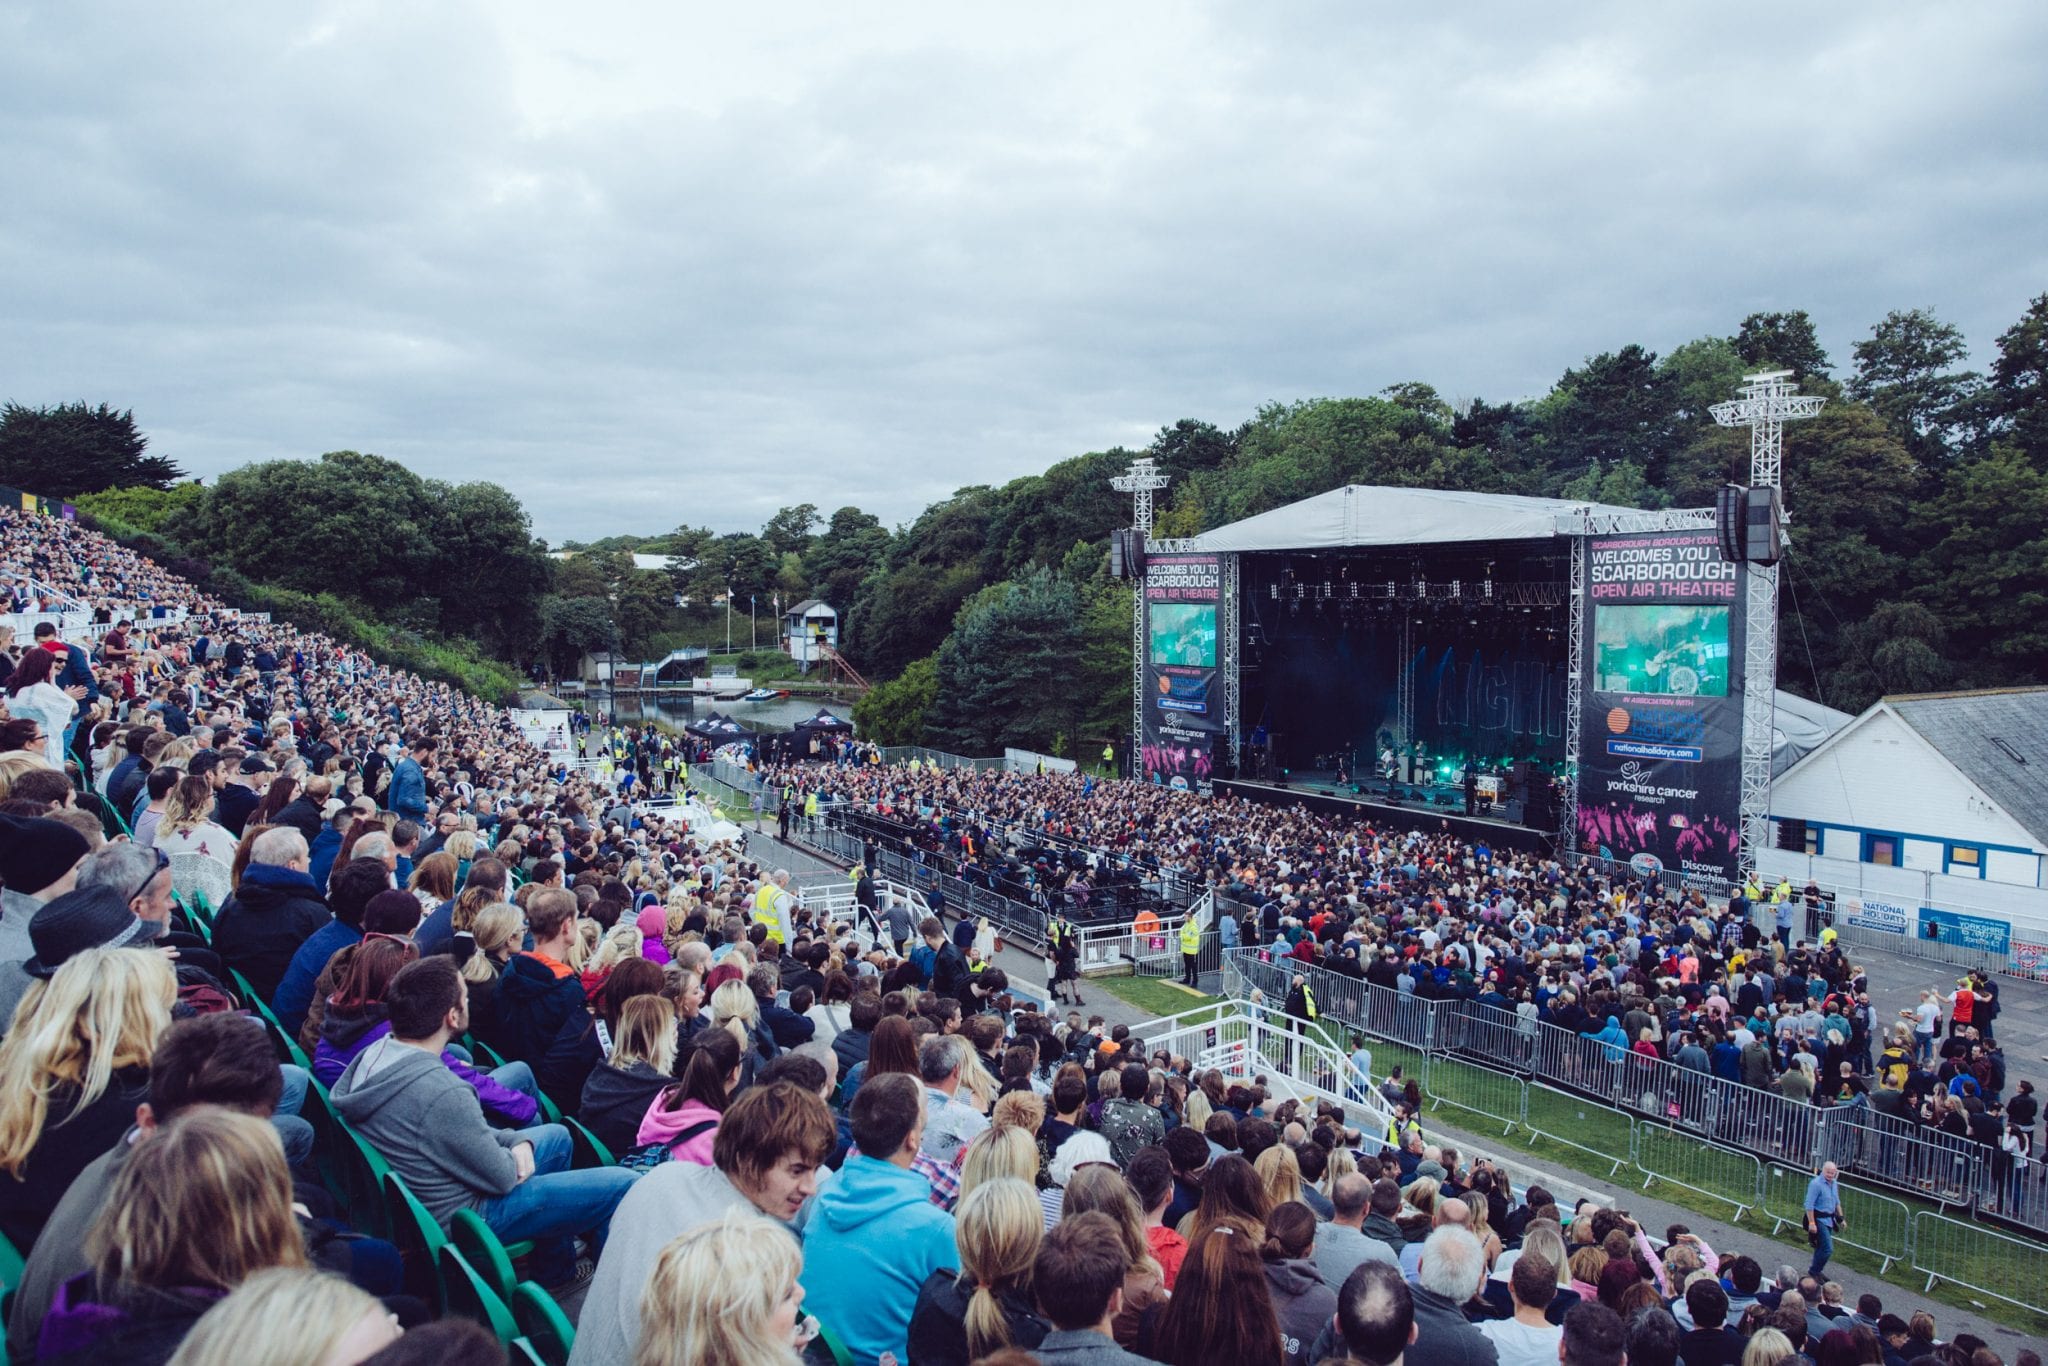 SCARBOROUGH OPEN AIR THEATRE SET FOR RECORD YEAR